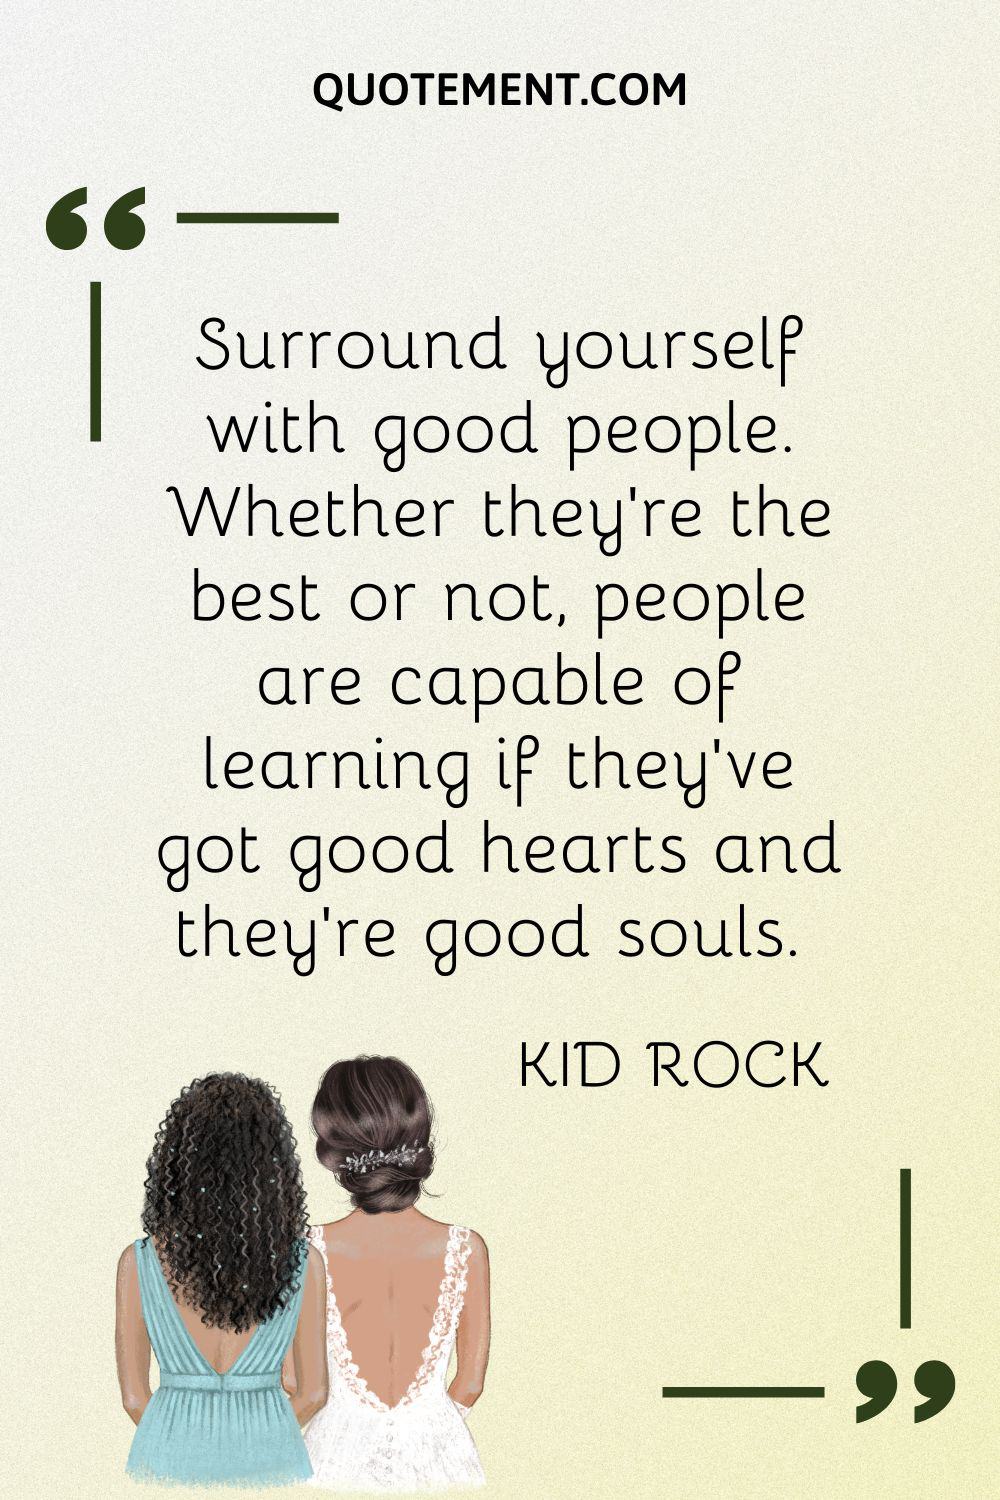 Surround yourself with good people. Whether they're the best or not